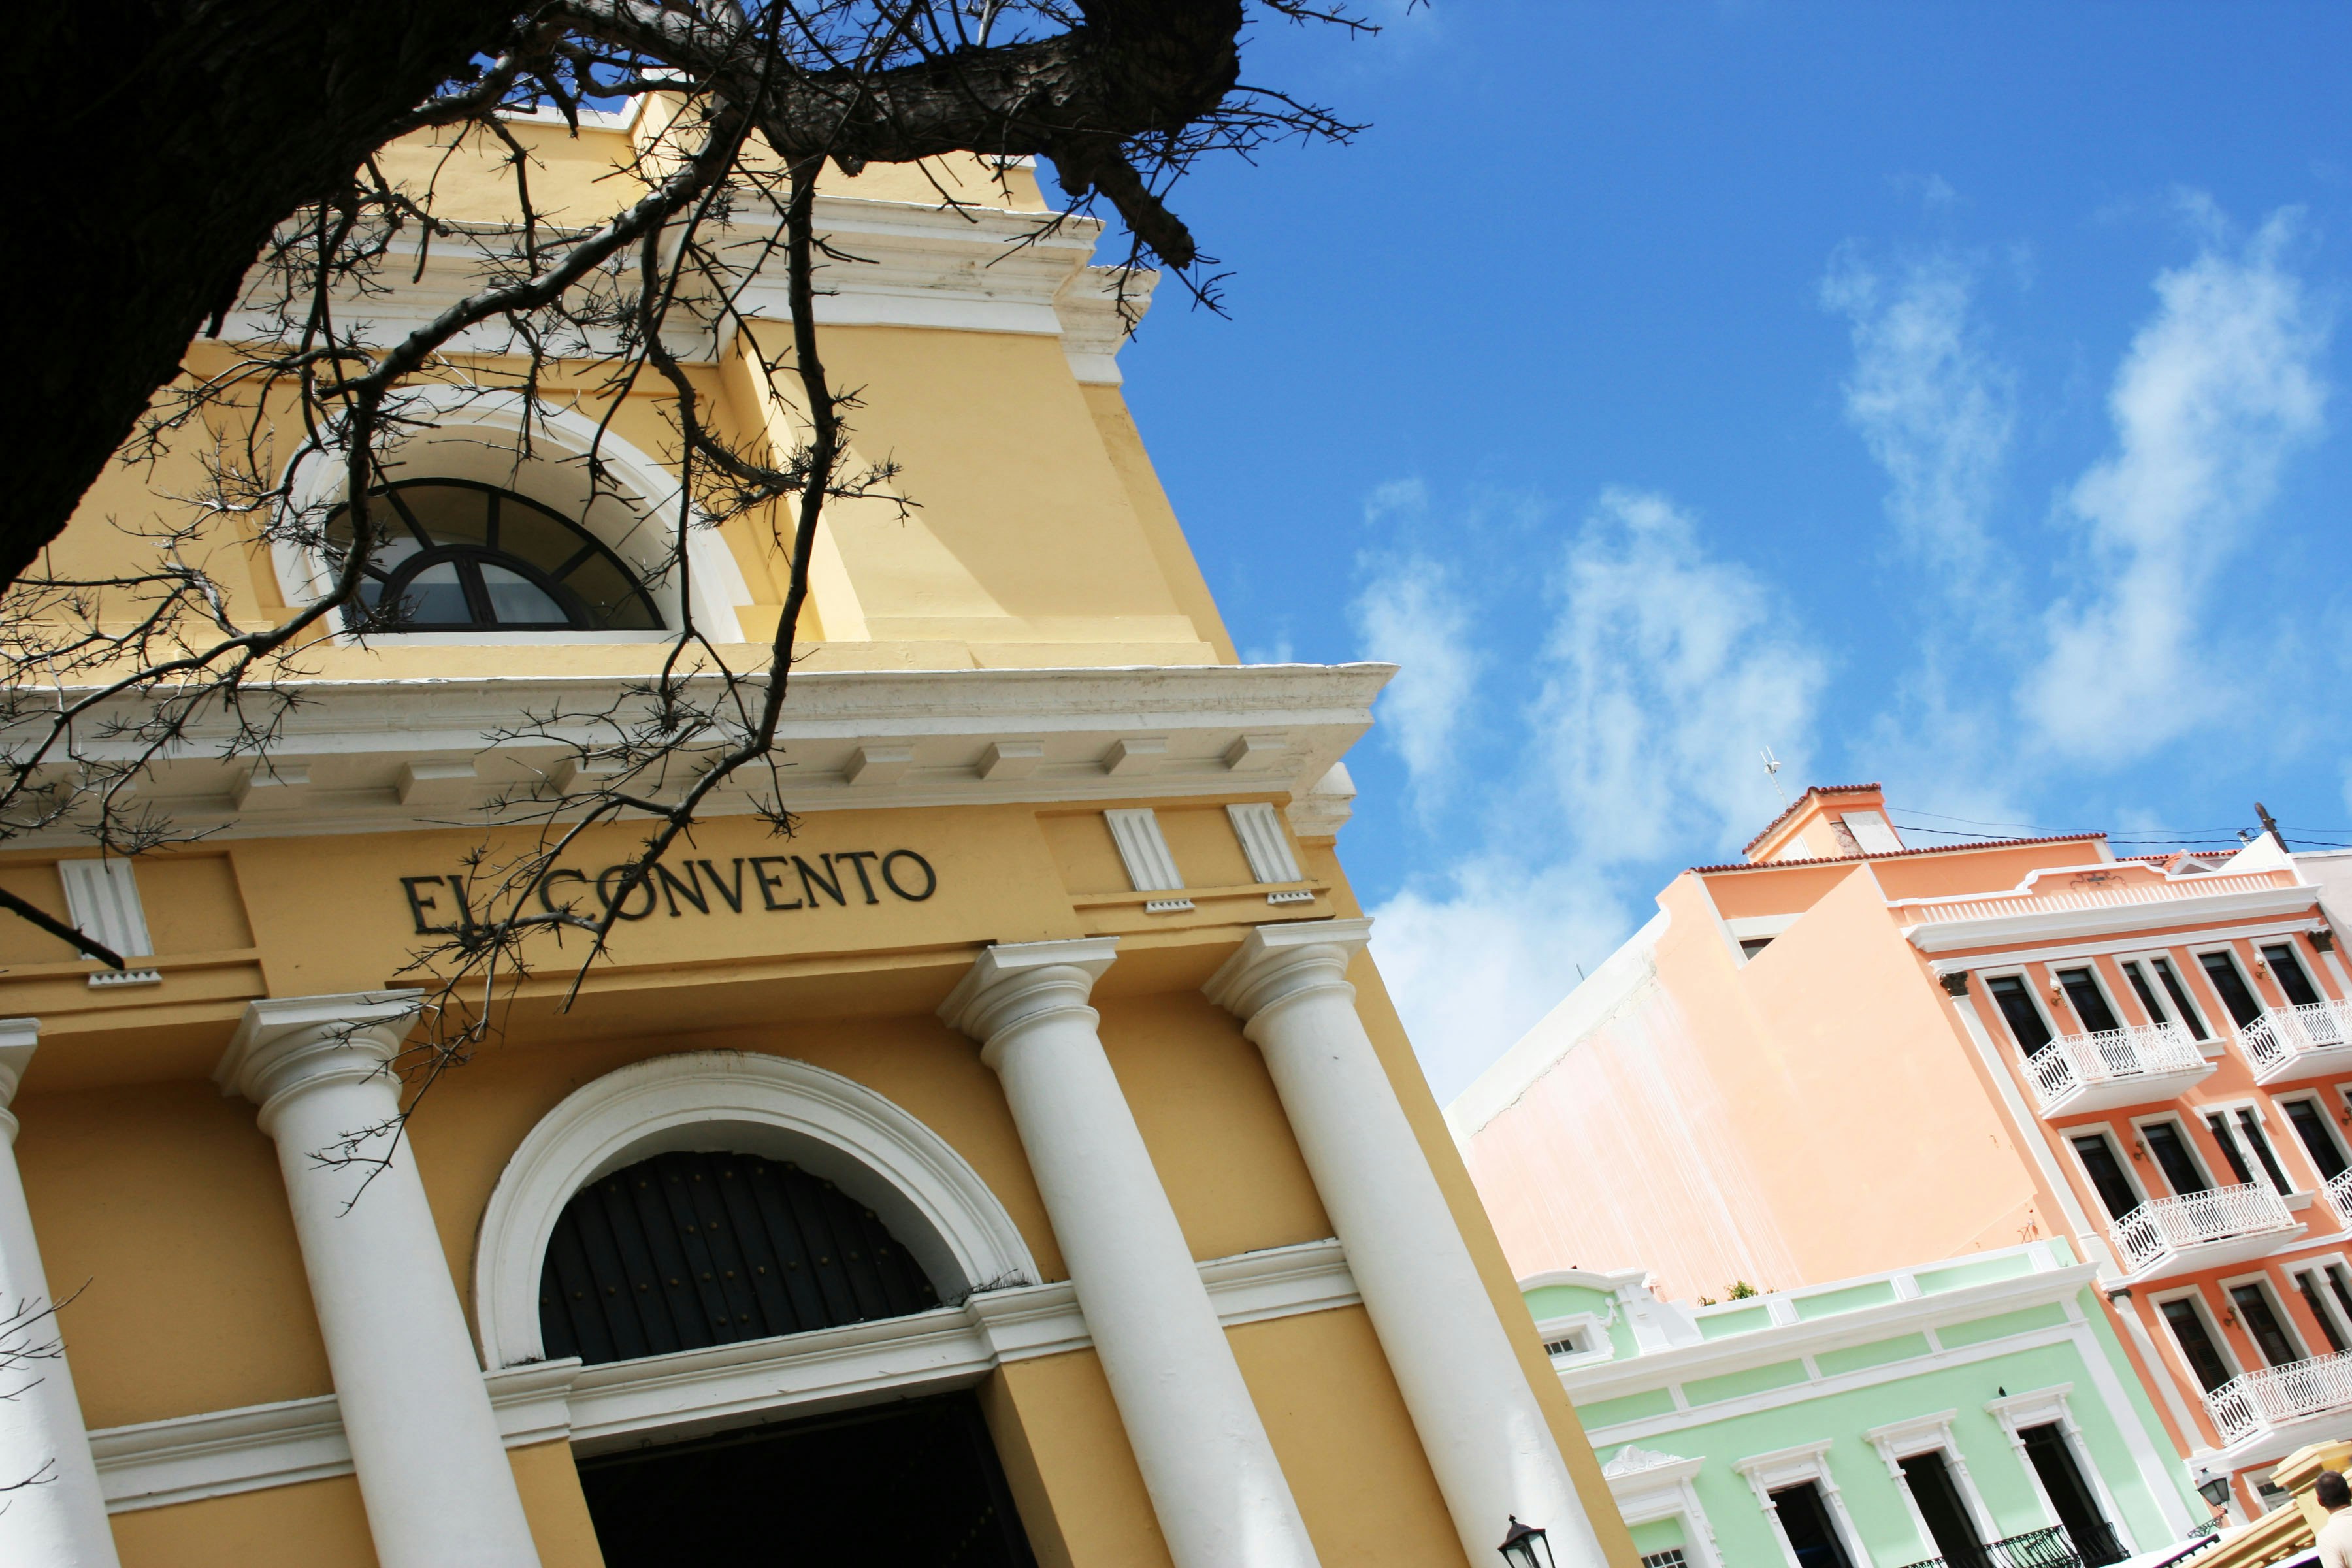 Close-up of a buttercream-colored neoclassical building, on which are the letters spelling out 'El Convento'. Other pastel-colored buildings can be seen behind it, beneath a blue sky